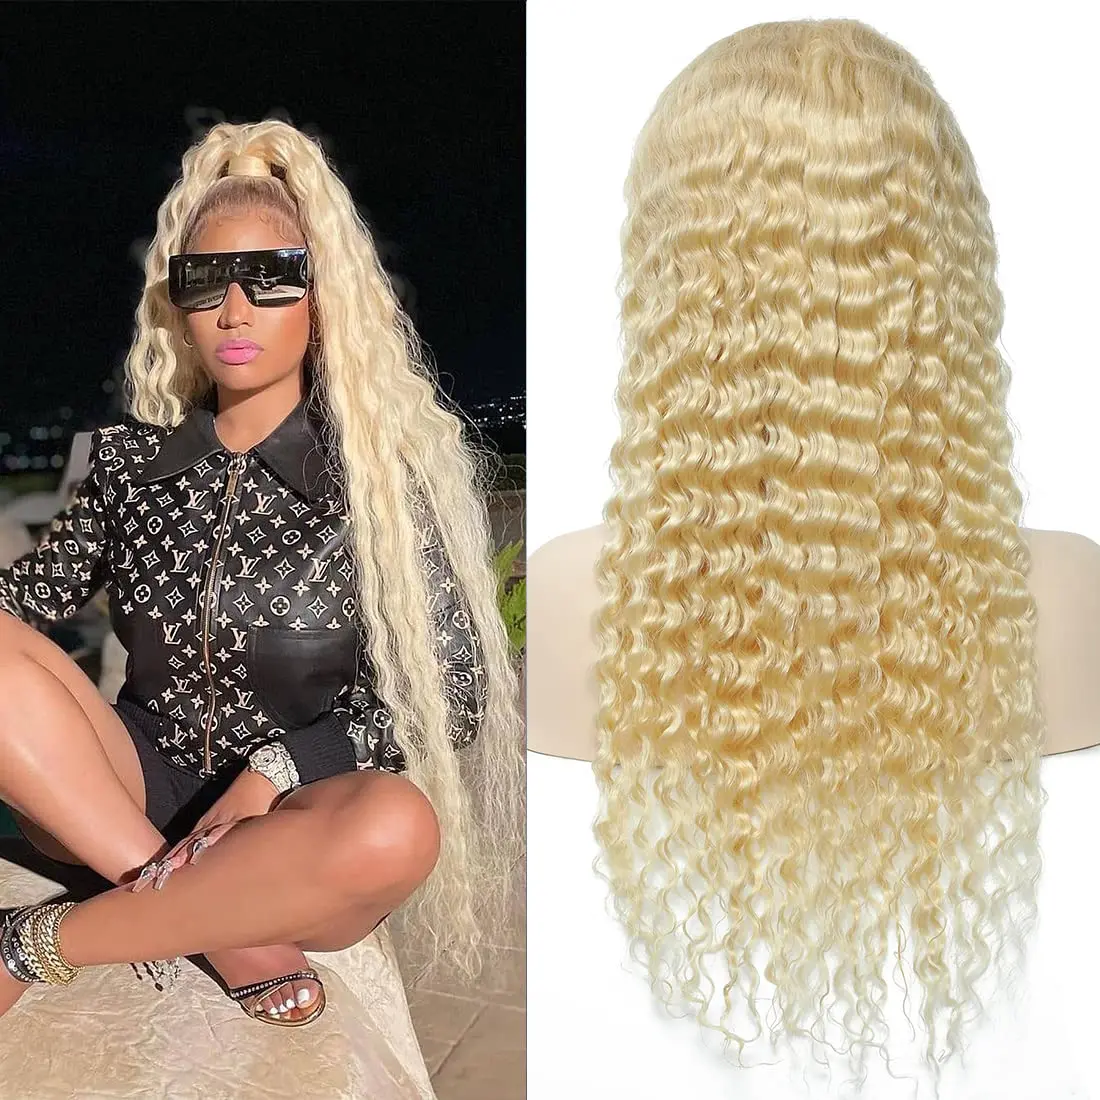 Blonde 613 Deep Wave Lace Frontal Wig Human Hair Lace Front Wig with Baby Hair Pre Plucked Free Part Deep Wave 613 Frontal Wig